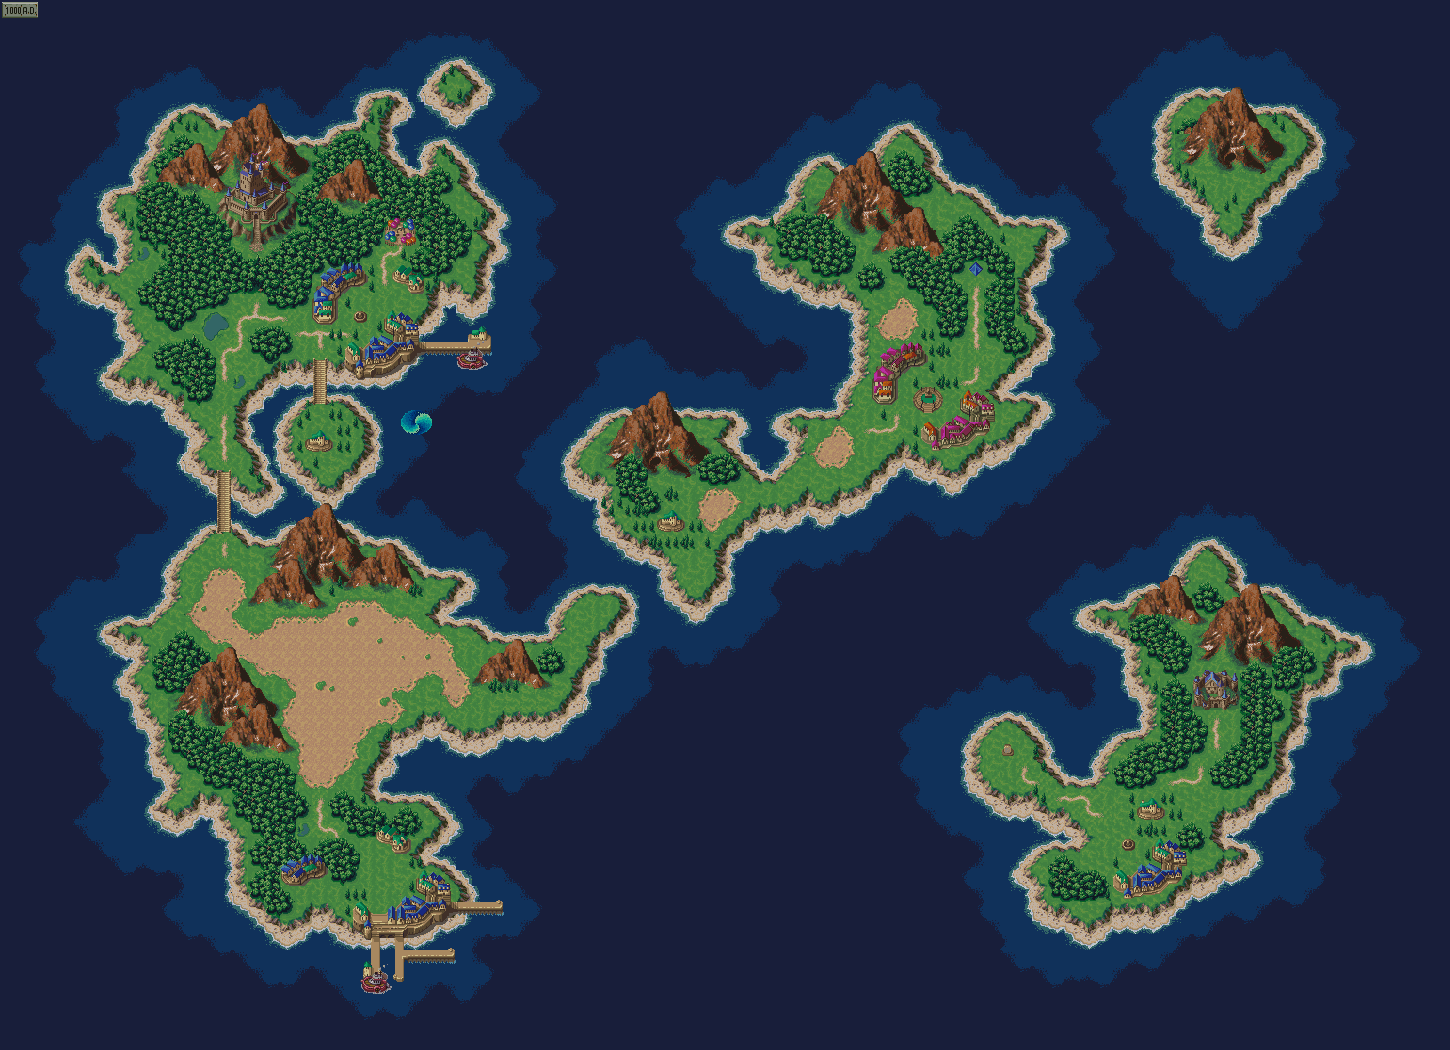 Videogame map